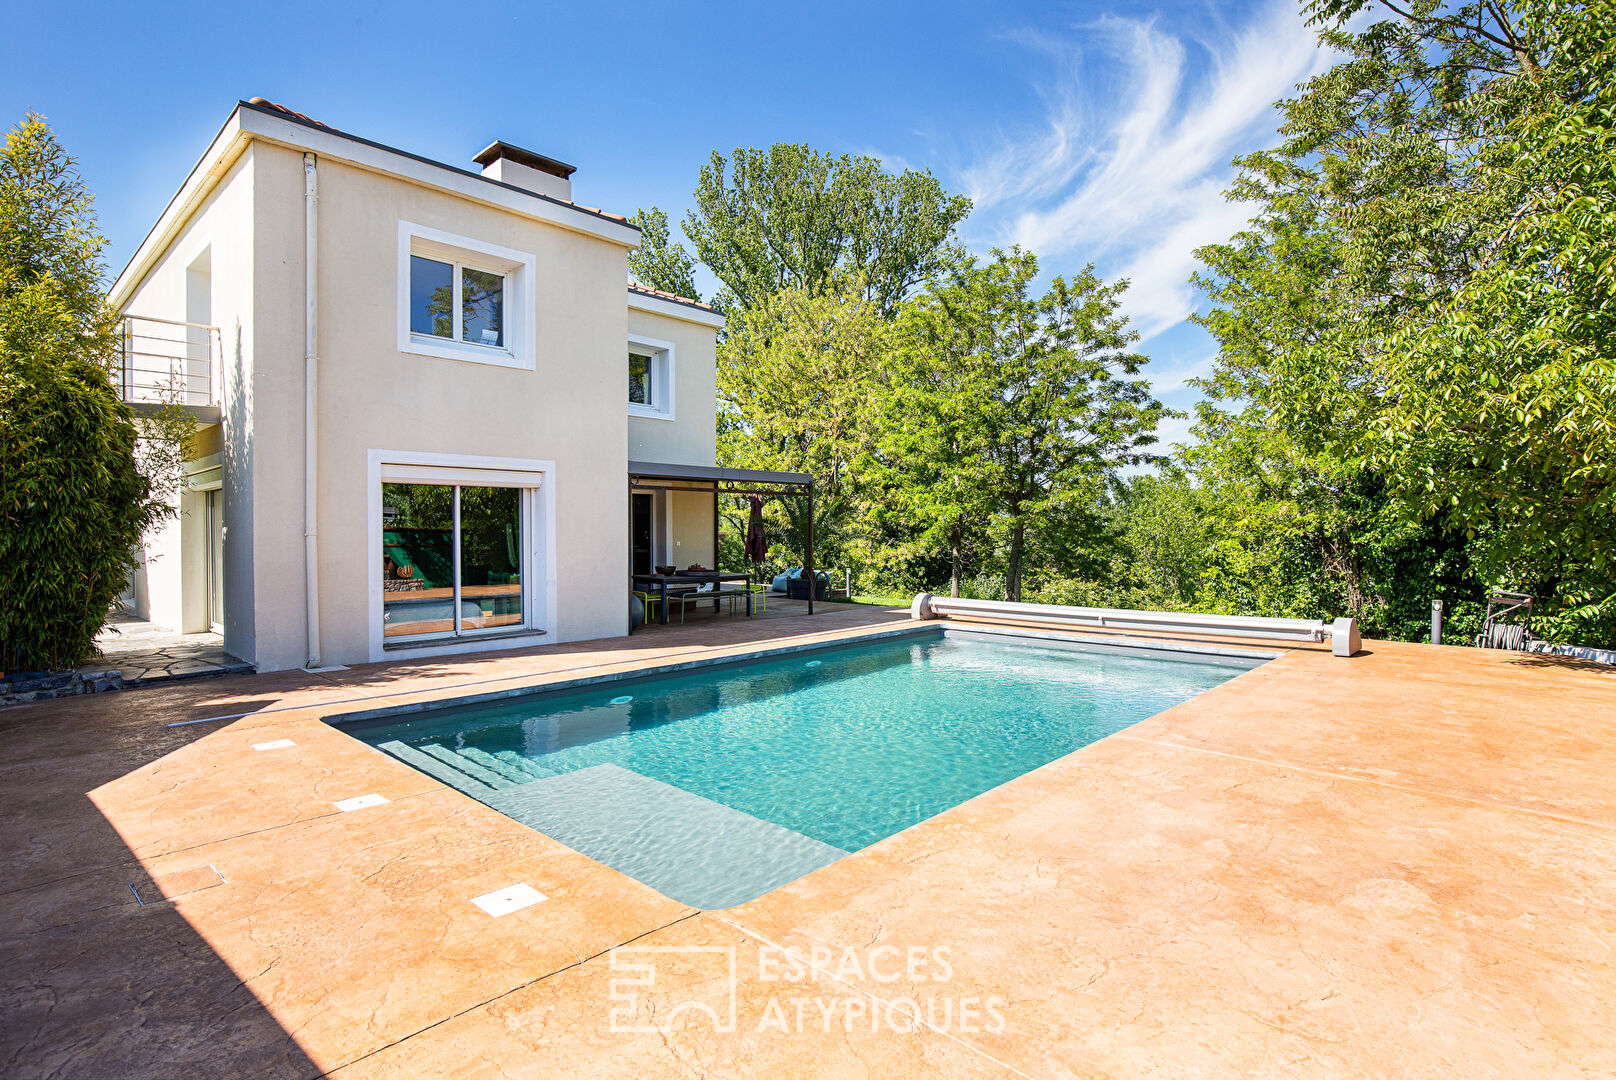 Renovated house with swimming pool on the banks of the Garonne